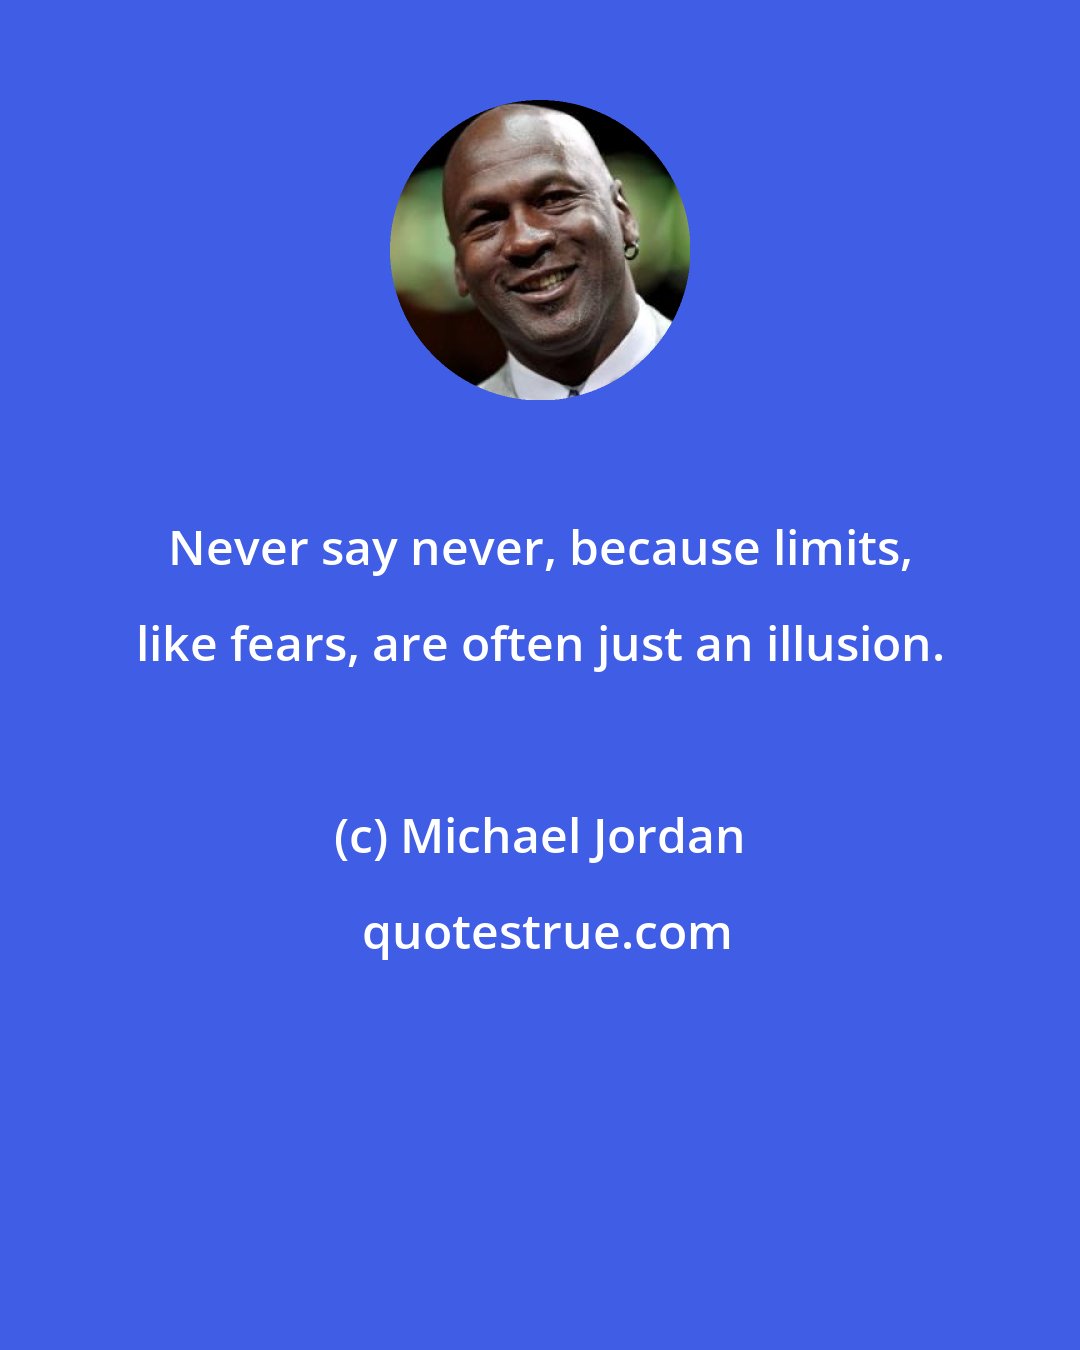 Michael Jordan: Never say never, because limits, like fears, are often just an illusion.